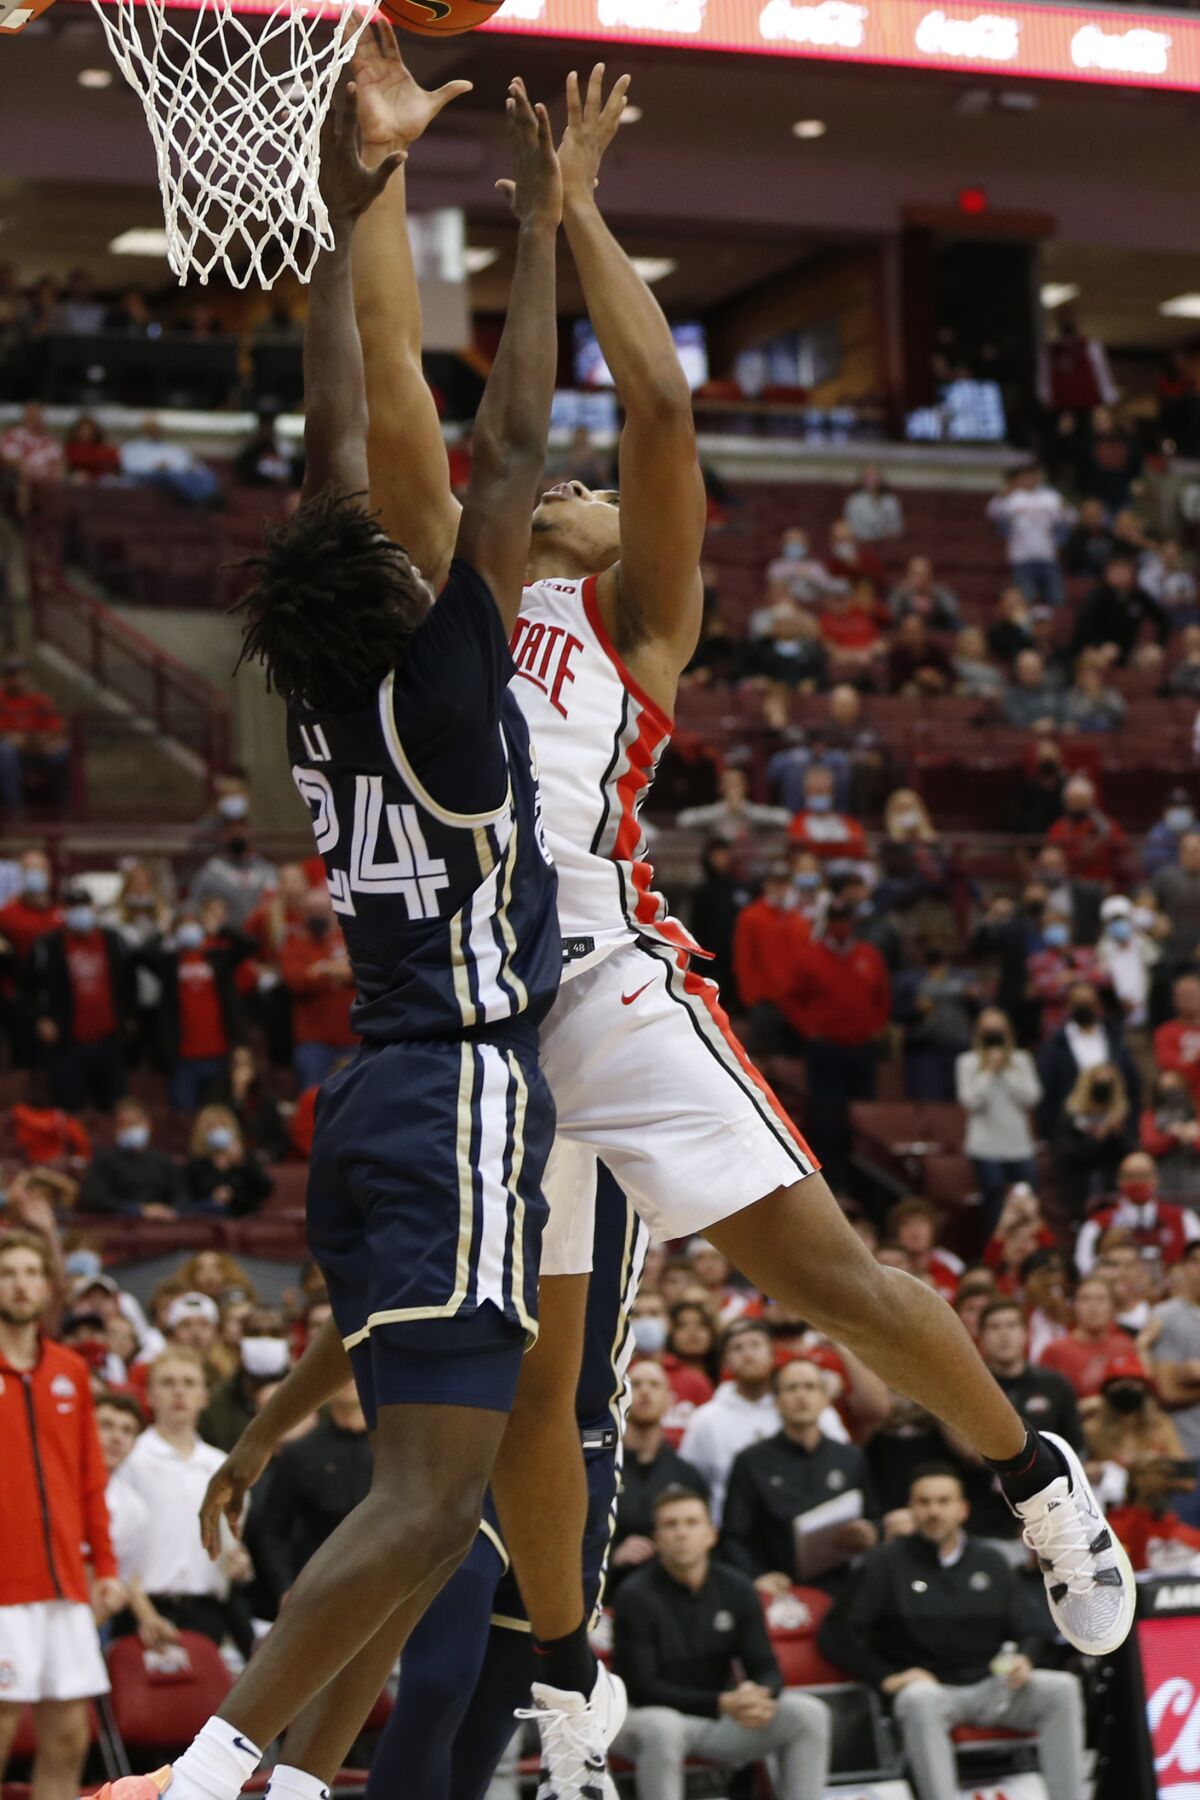 Ohio State's Zed Key, right, makes the game-winning basket over Akron's Ali Ali in the closing second of the second half of an NCAA college basketball game Tuesday, Nov. 9, 2021, in Columbus, Ohio. (AP Photo/Jay LaPrete)